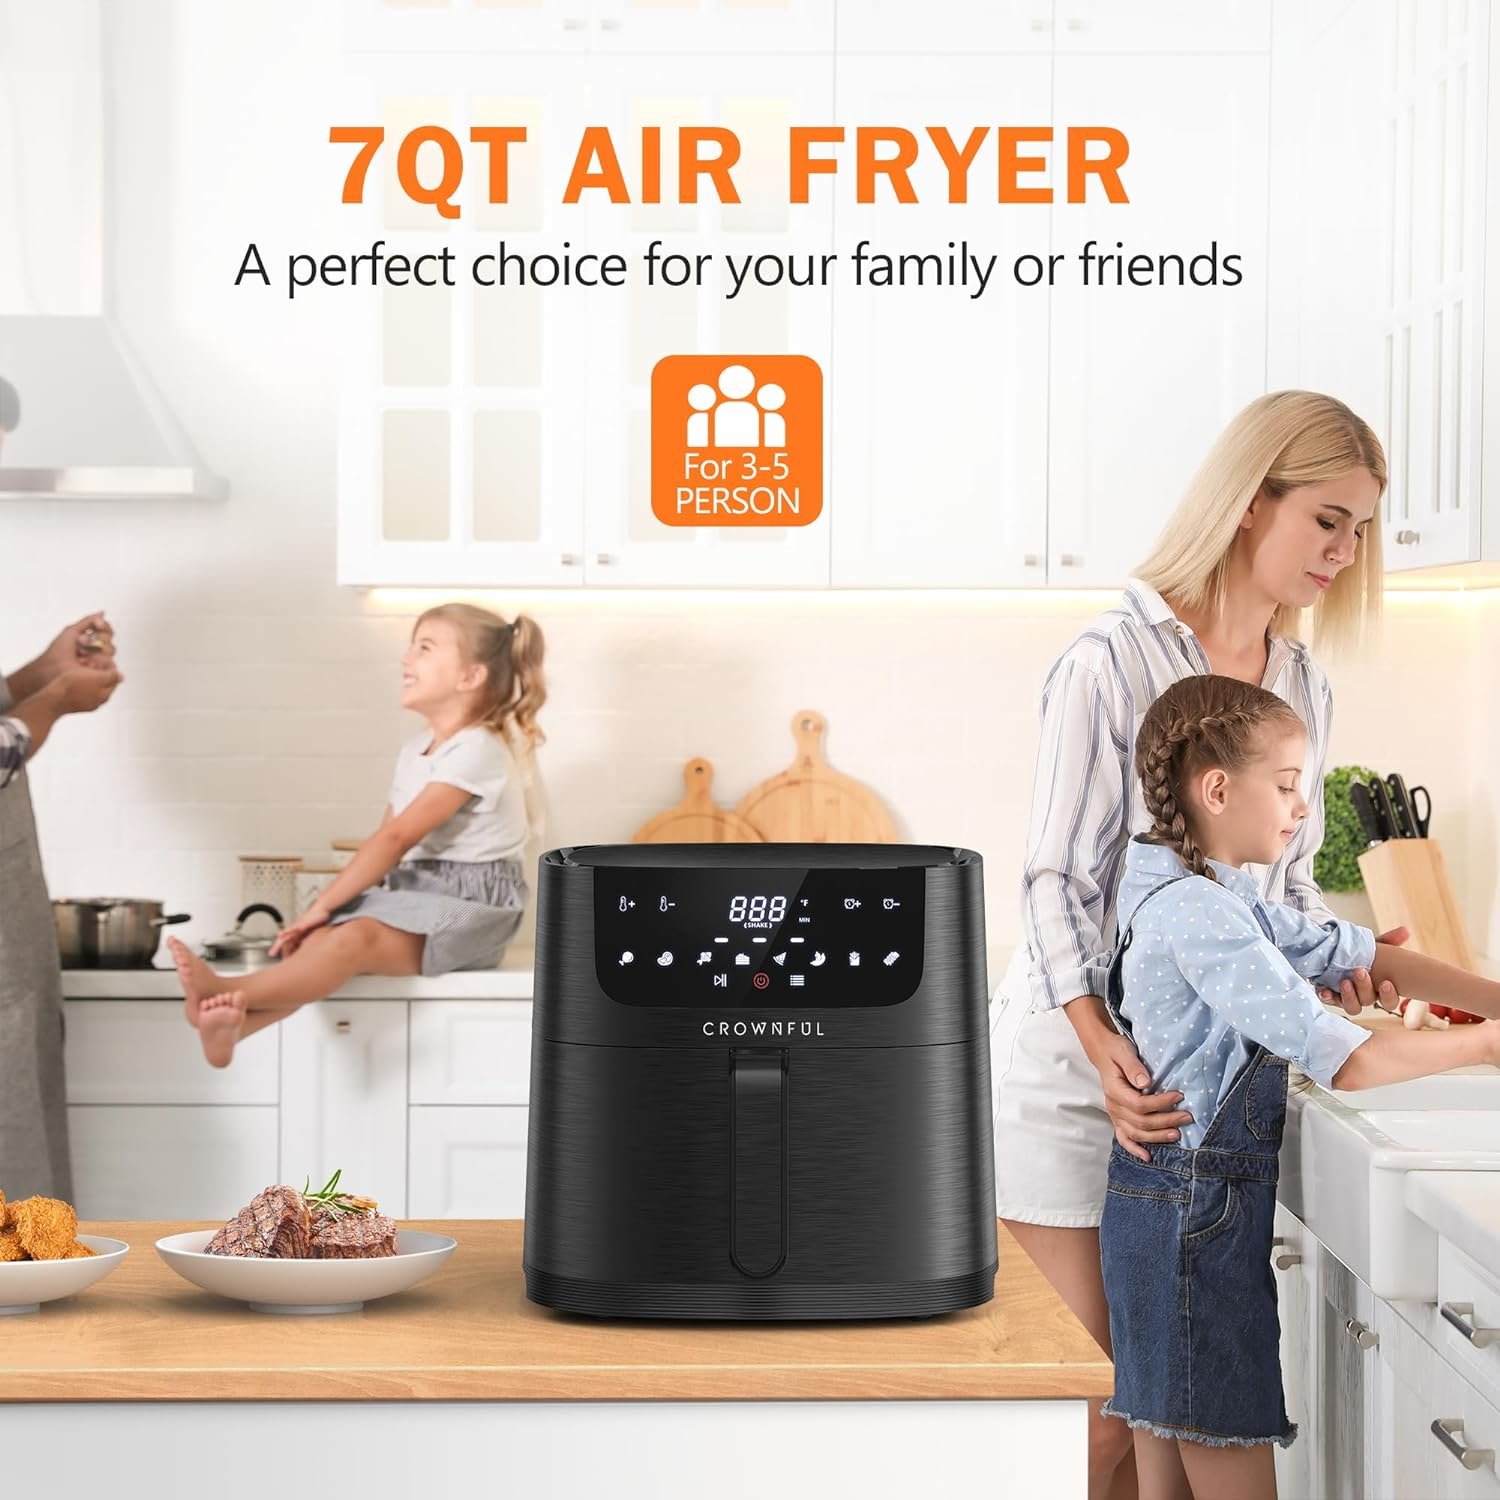 CROWNFUL 7 Quart Air Fryer, Oilless Electric Cooker with 8 Cooking Functions, LCD Digital Touch Screen with Precise Temperature Control, Shake Reminder Function, 1500W, UL Listed-Black